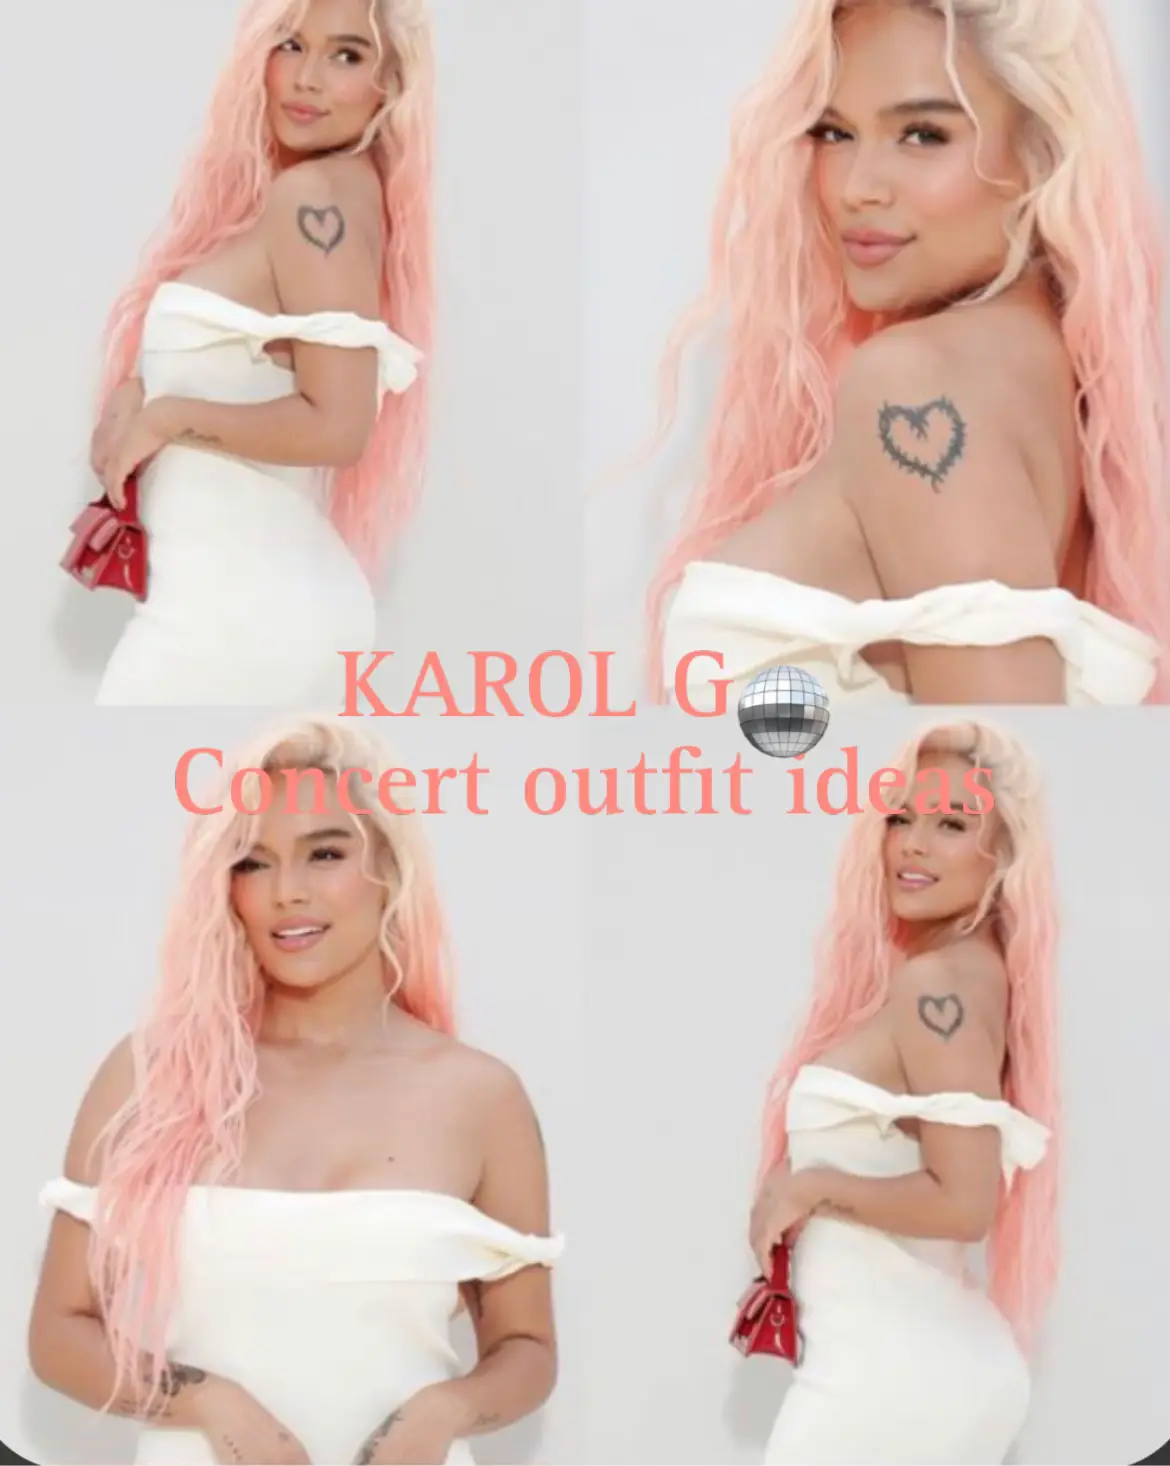 5 things to know about Karol G before her historic Gillette concert